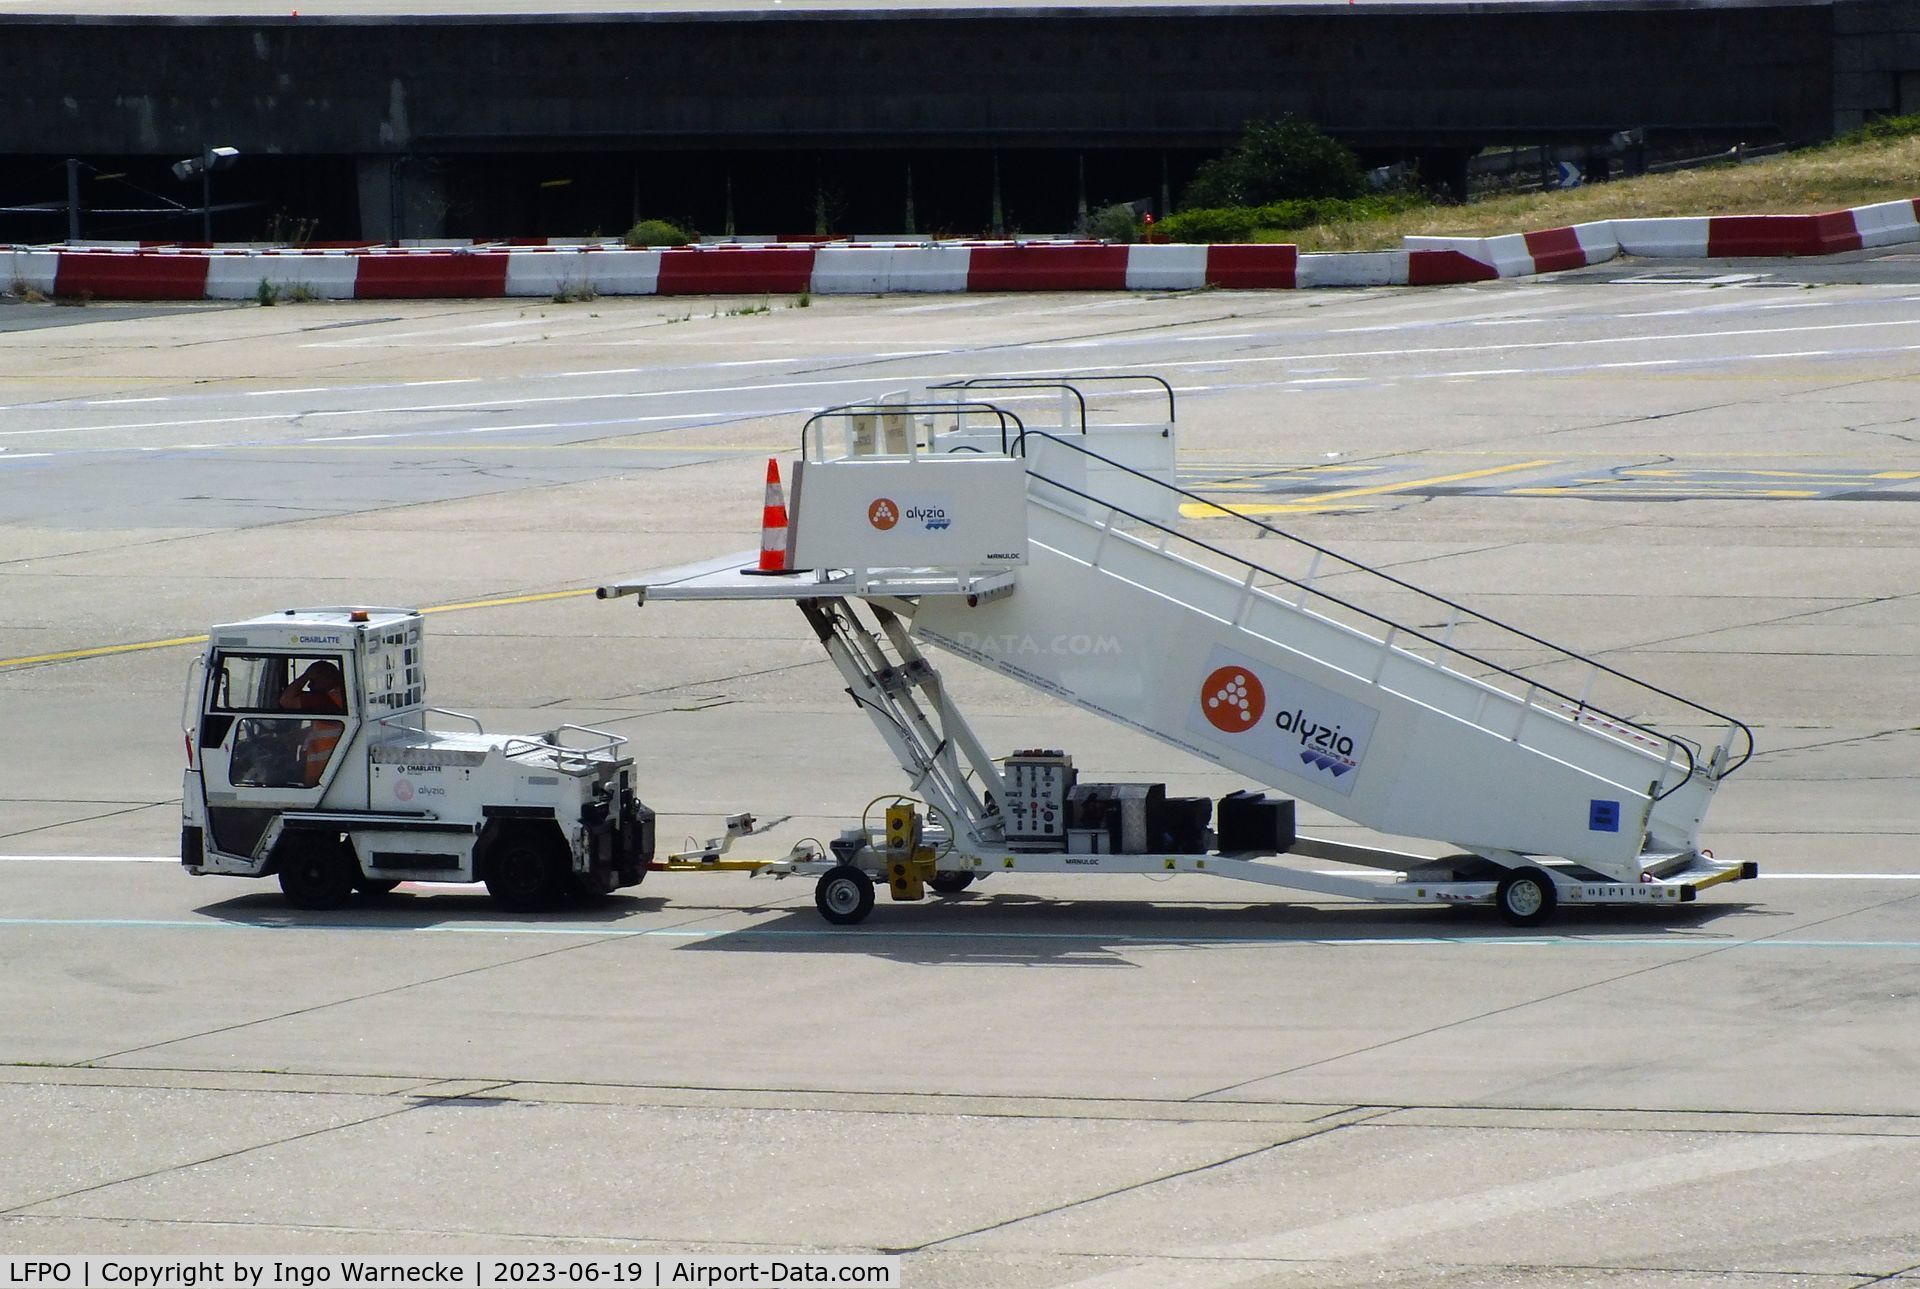 Paris Orly Airport, Orly (near Paris) France (LFPO) - open boarding stairs being towed at Paris/Orly airport